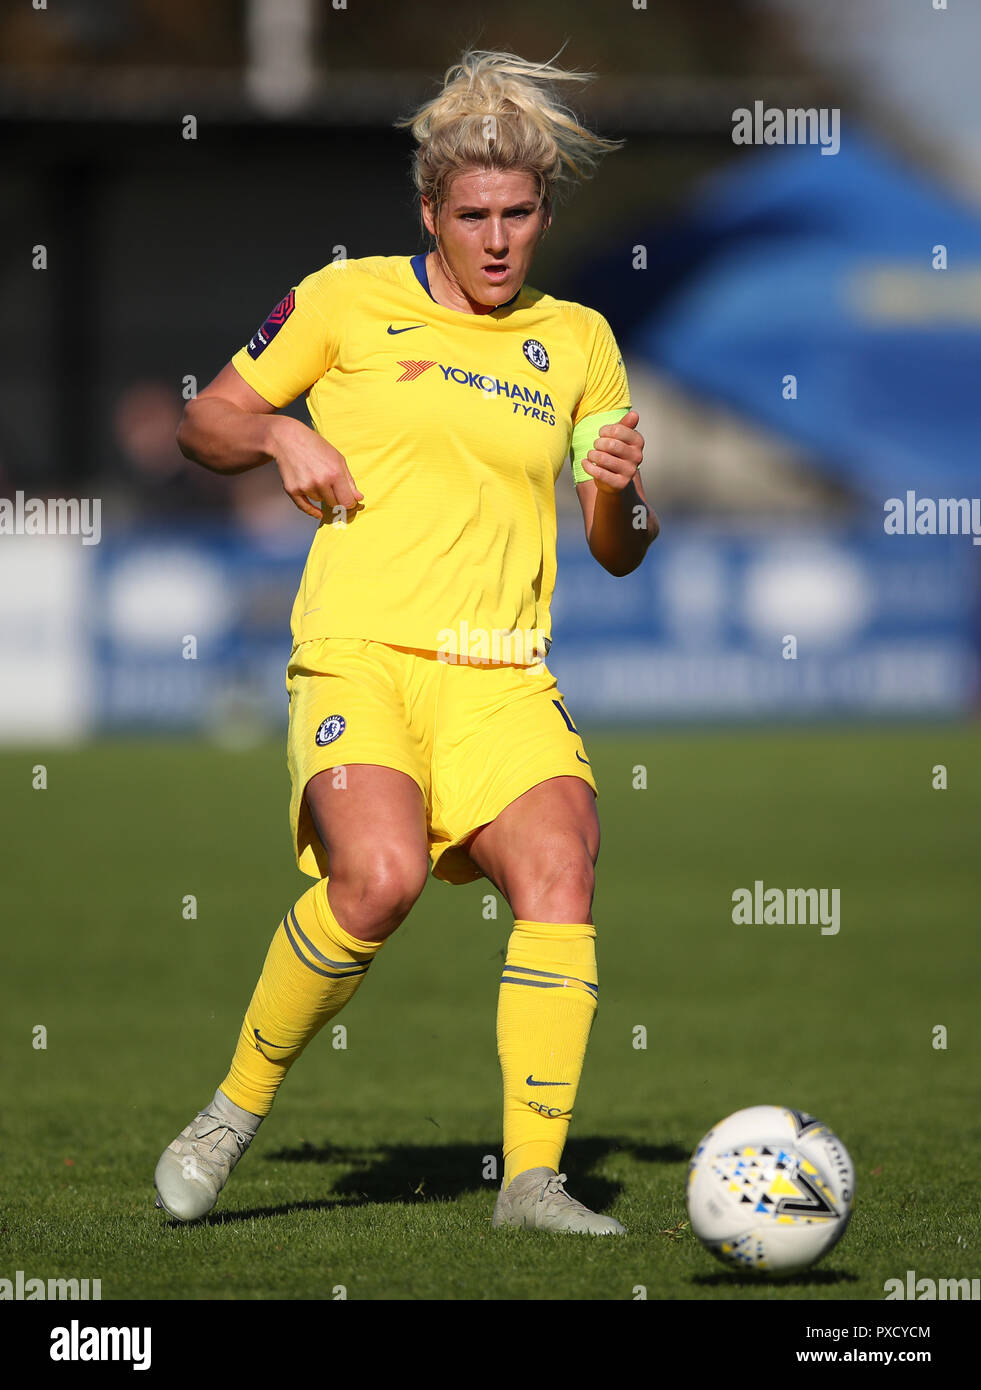 Chelsea's Millie Bright during the Women's Super League match at the Automated Technology Group Stadium, Solihull. PRESS ASSOCIATION Photo. Picture date: Sunday October 21, 2018. See PA story SOCCER Birmingham Women. Photo credit should read: Nick Potts/PA Wire. RESTRICTIONS: No use with unauthorised audio, video, data, fixture lists, club/league logos or 'live' services. Online in-match use limited to 75 images, no video emulation. No use in betting, games or single club/league/player publications. Stock Photo